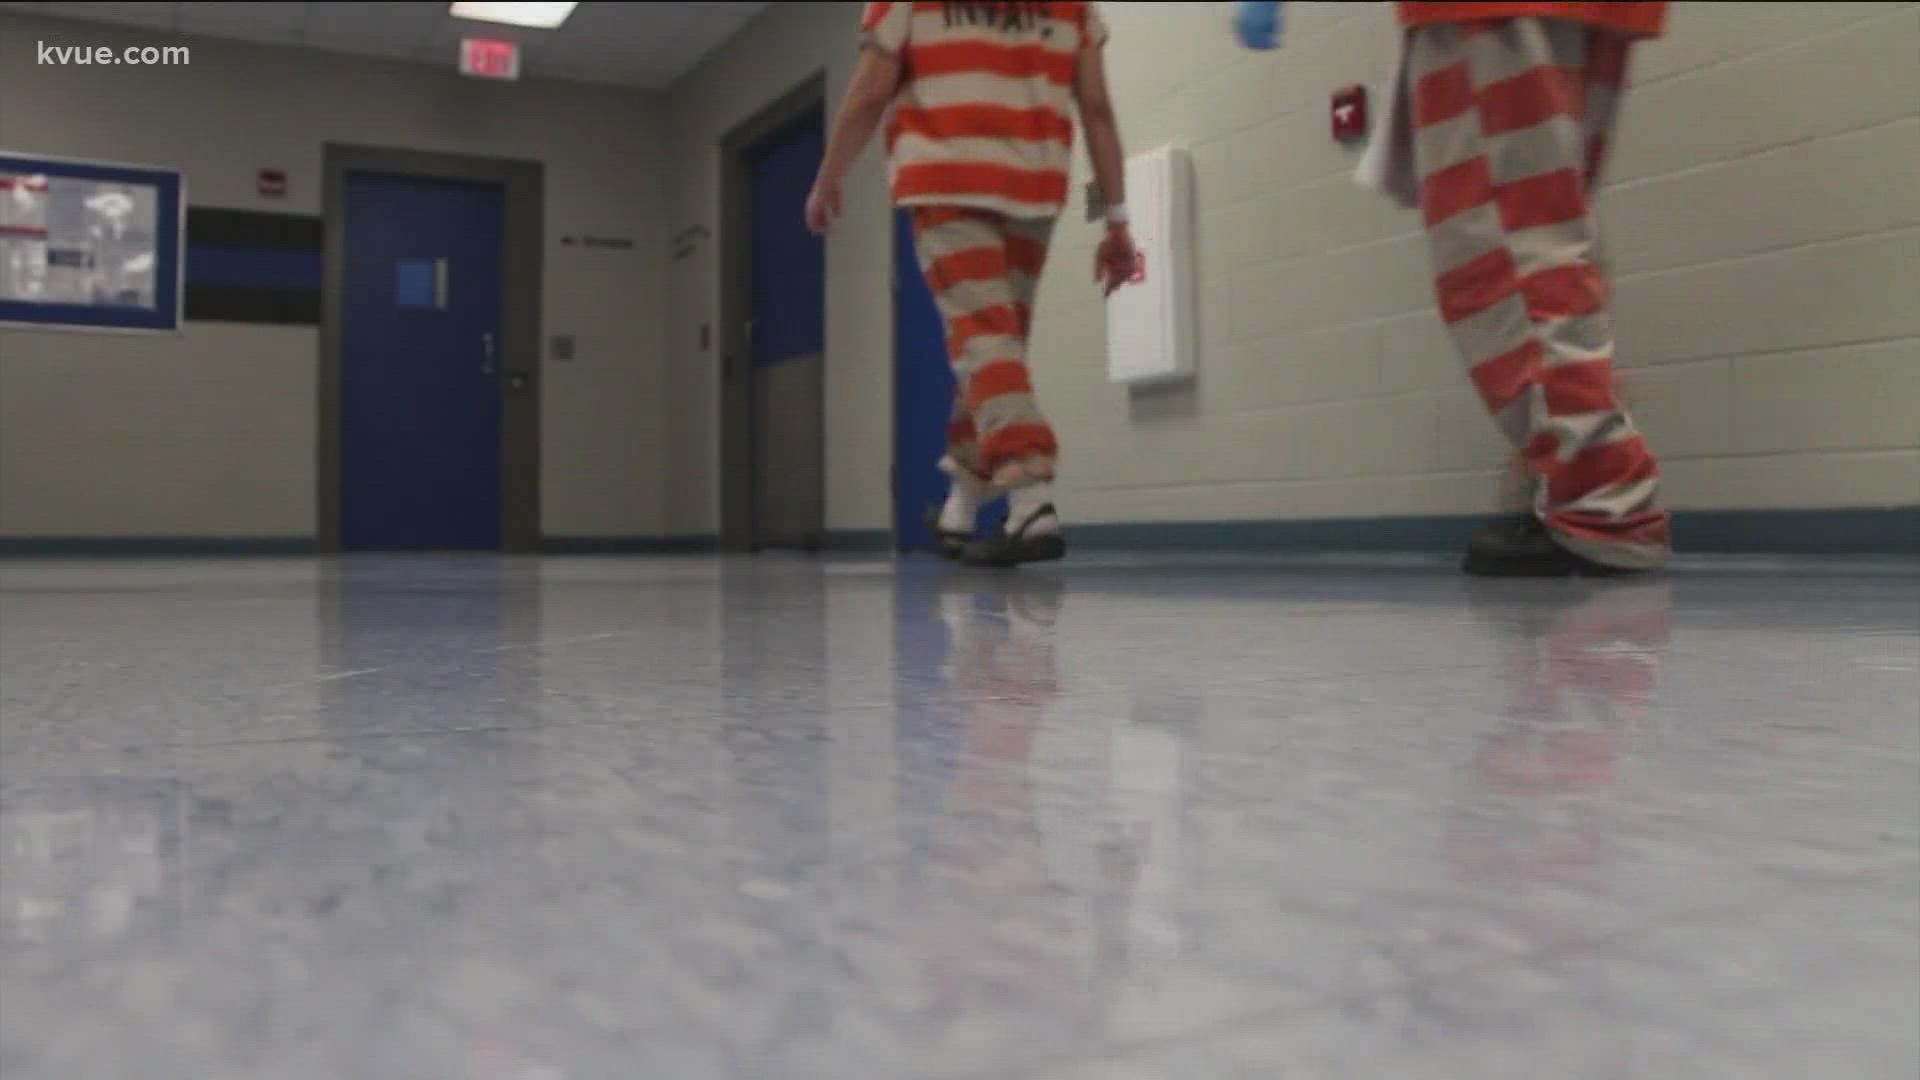 The U.S. Justice Department is investigating five Texas juvenile correctional centers after allegations of abuse.